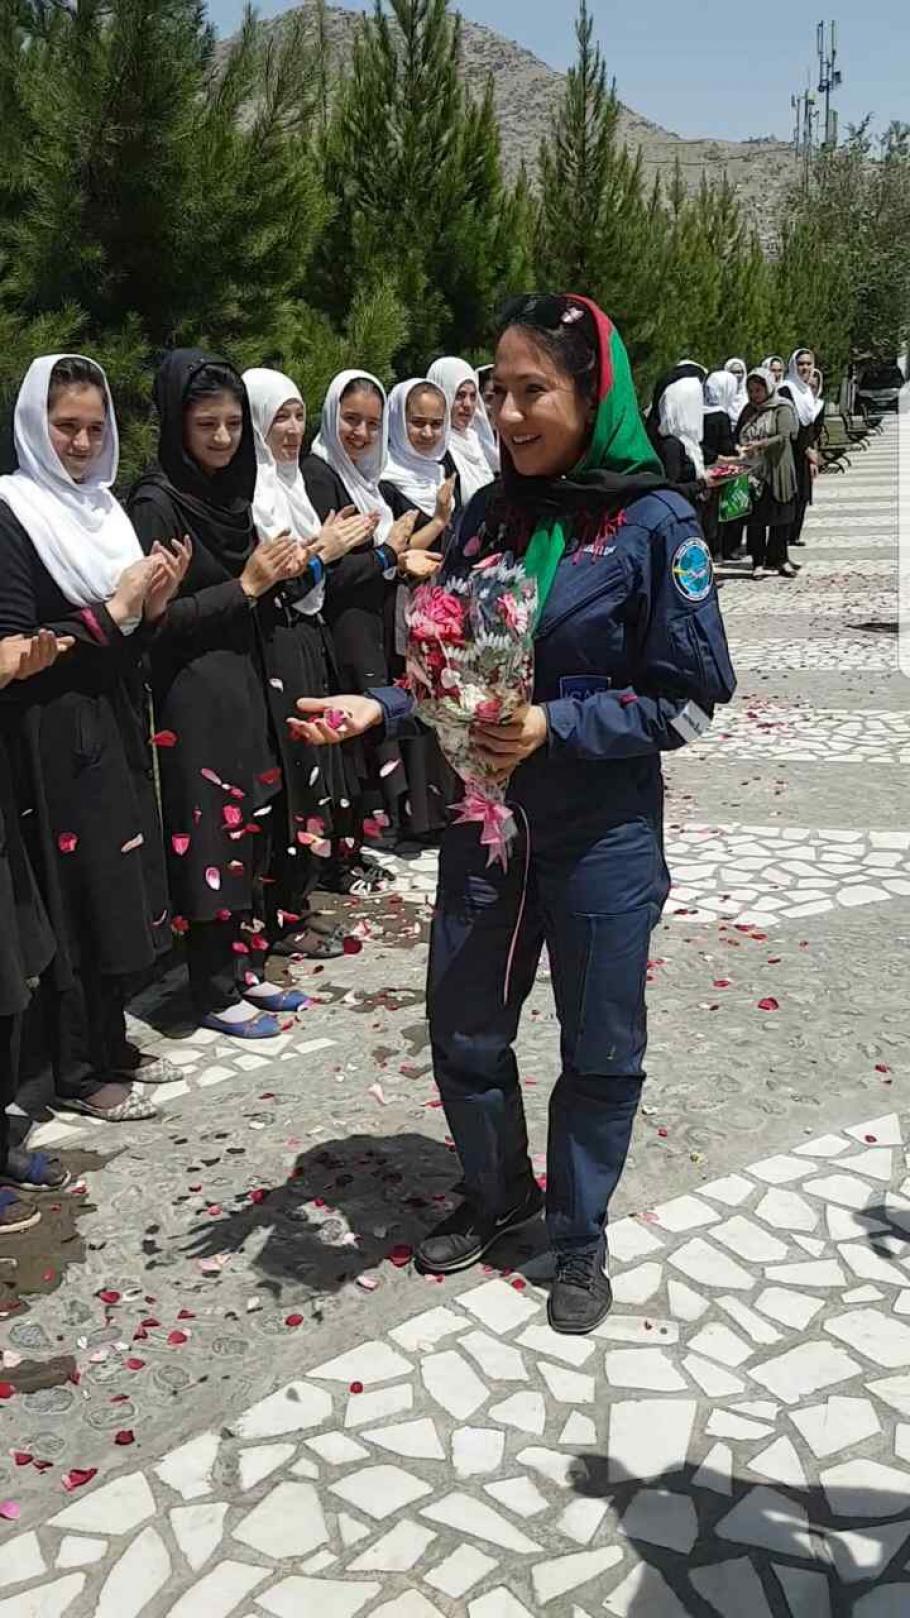 Shaesta returning to Kabul, Afghanistan, after her record-breaking flight.